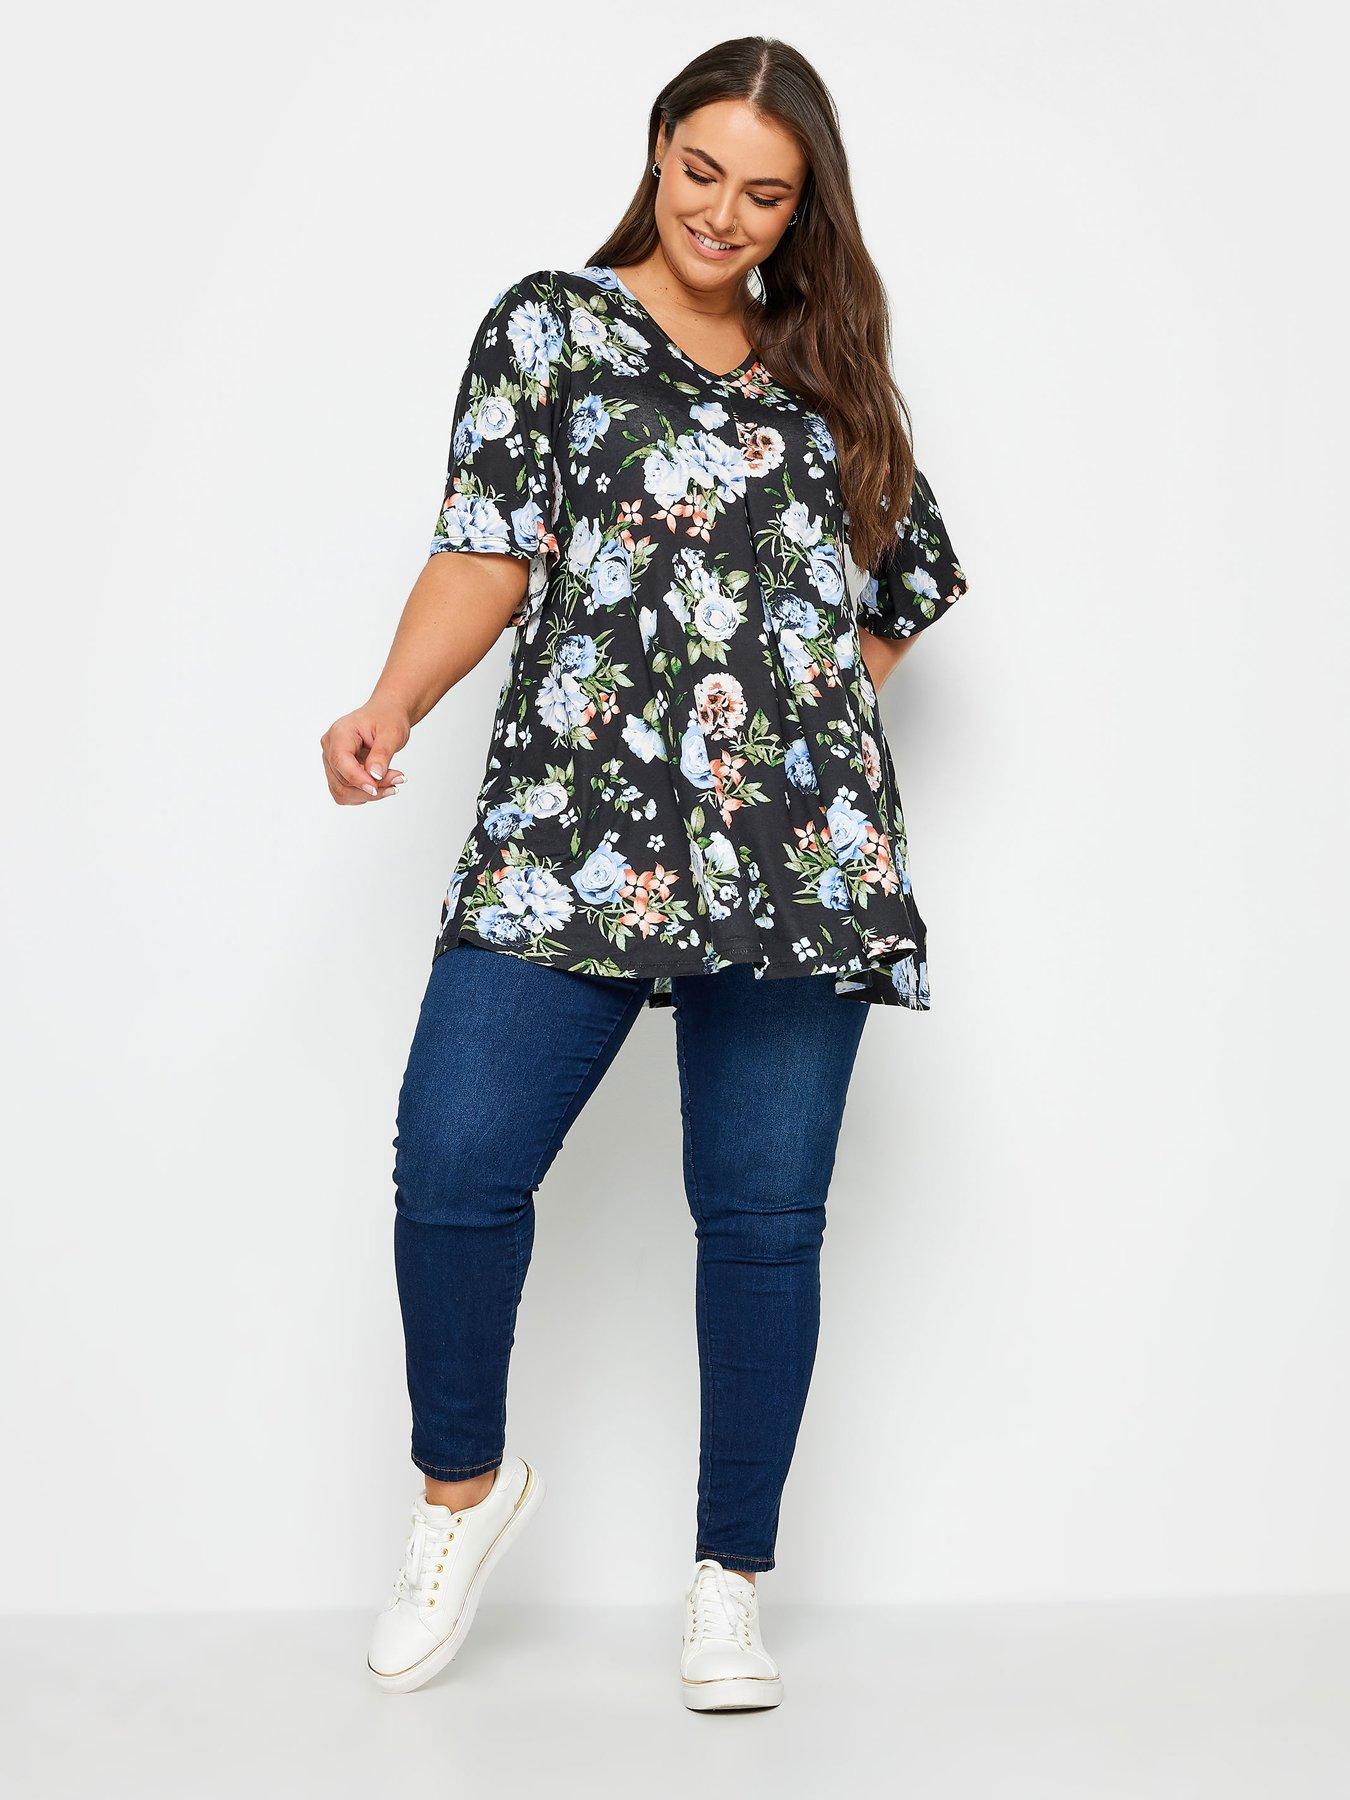 YOURS Plus Size Black Floral Print Long Sleeve Gypsy Tunic Top